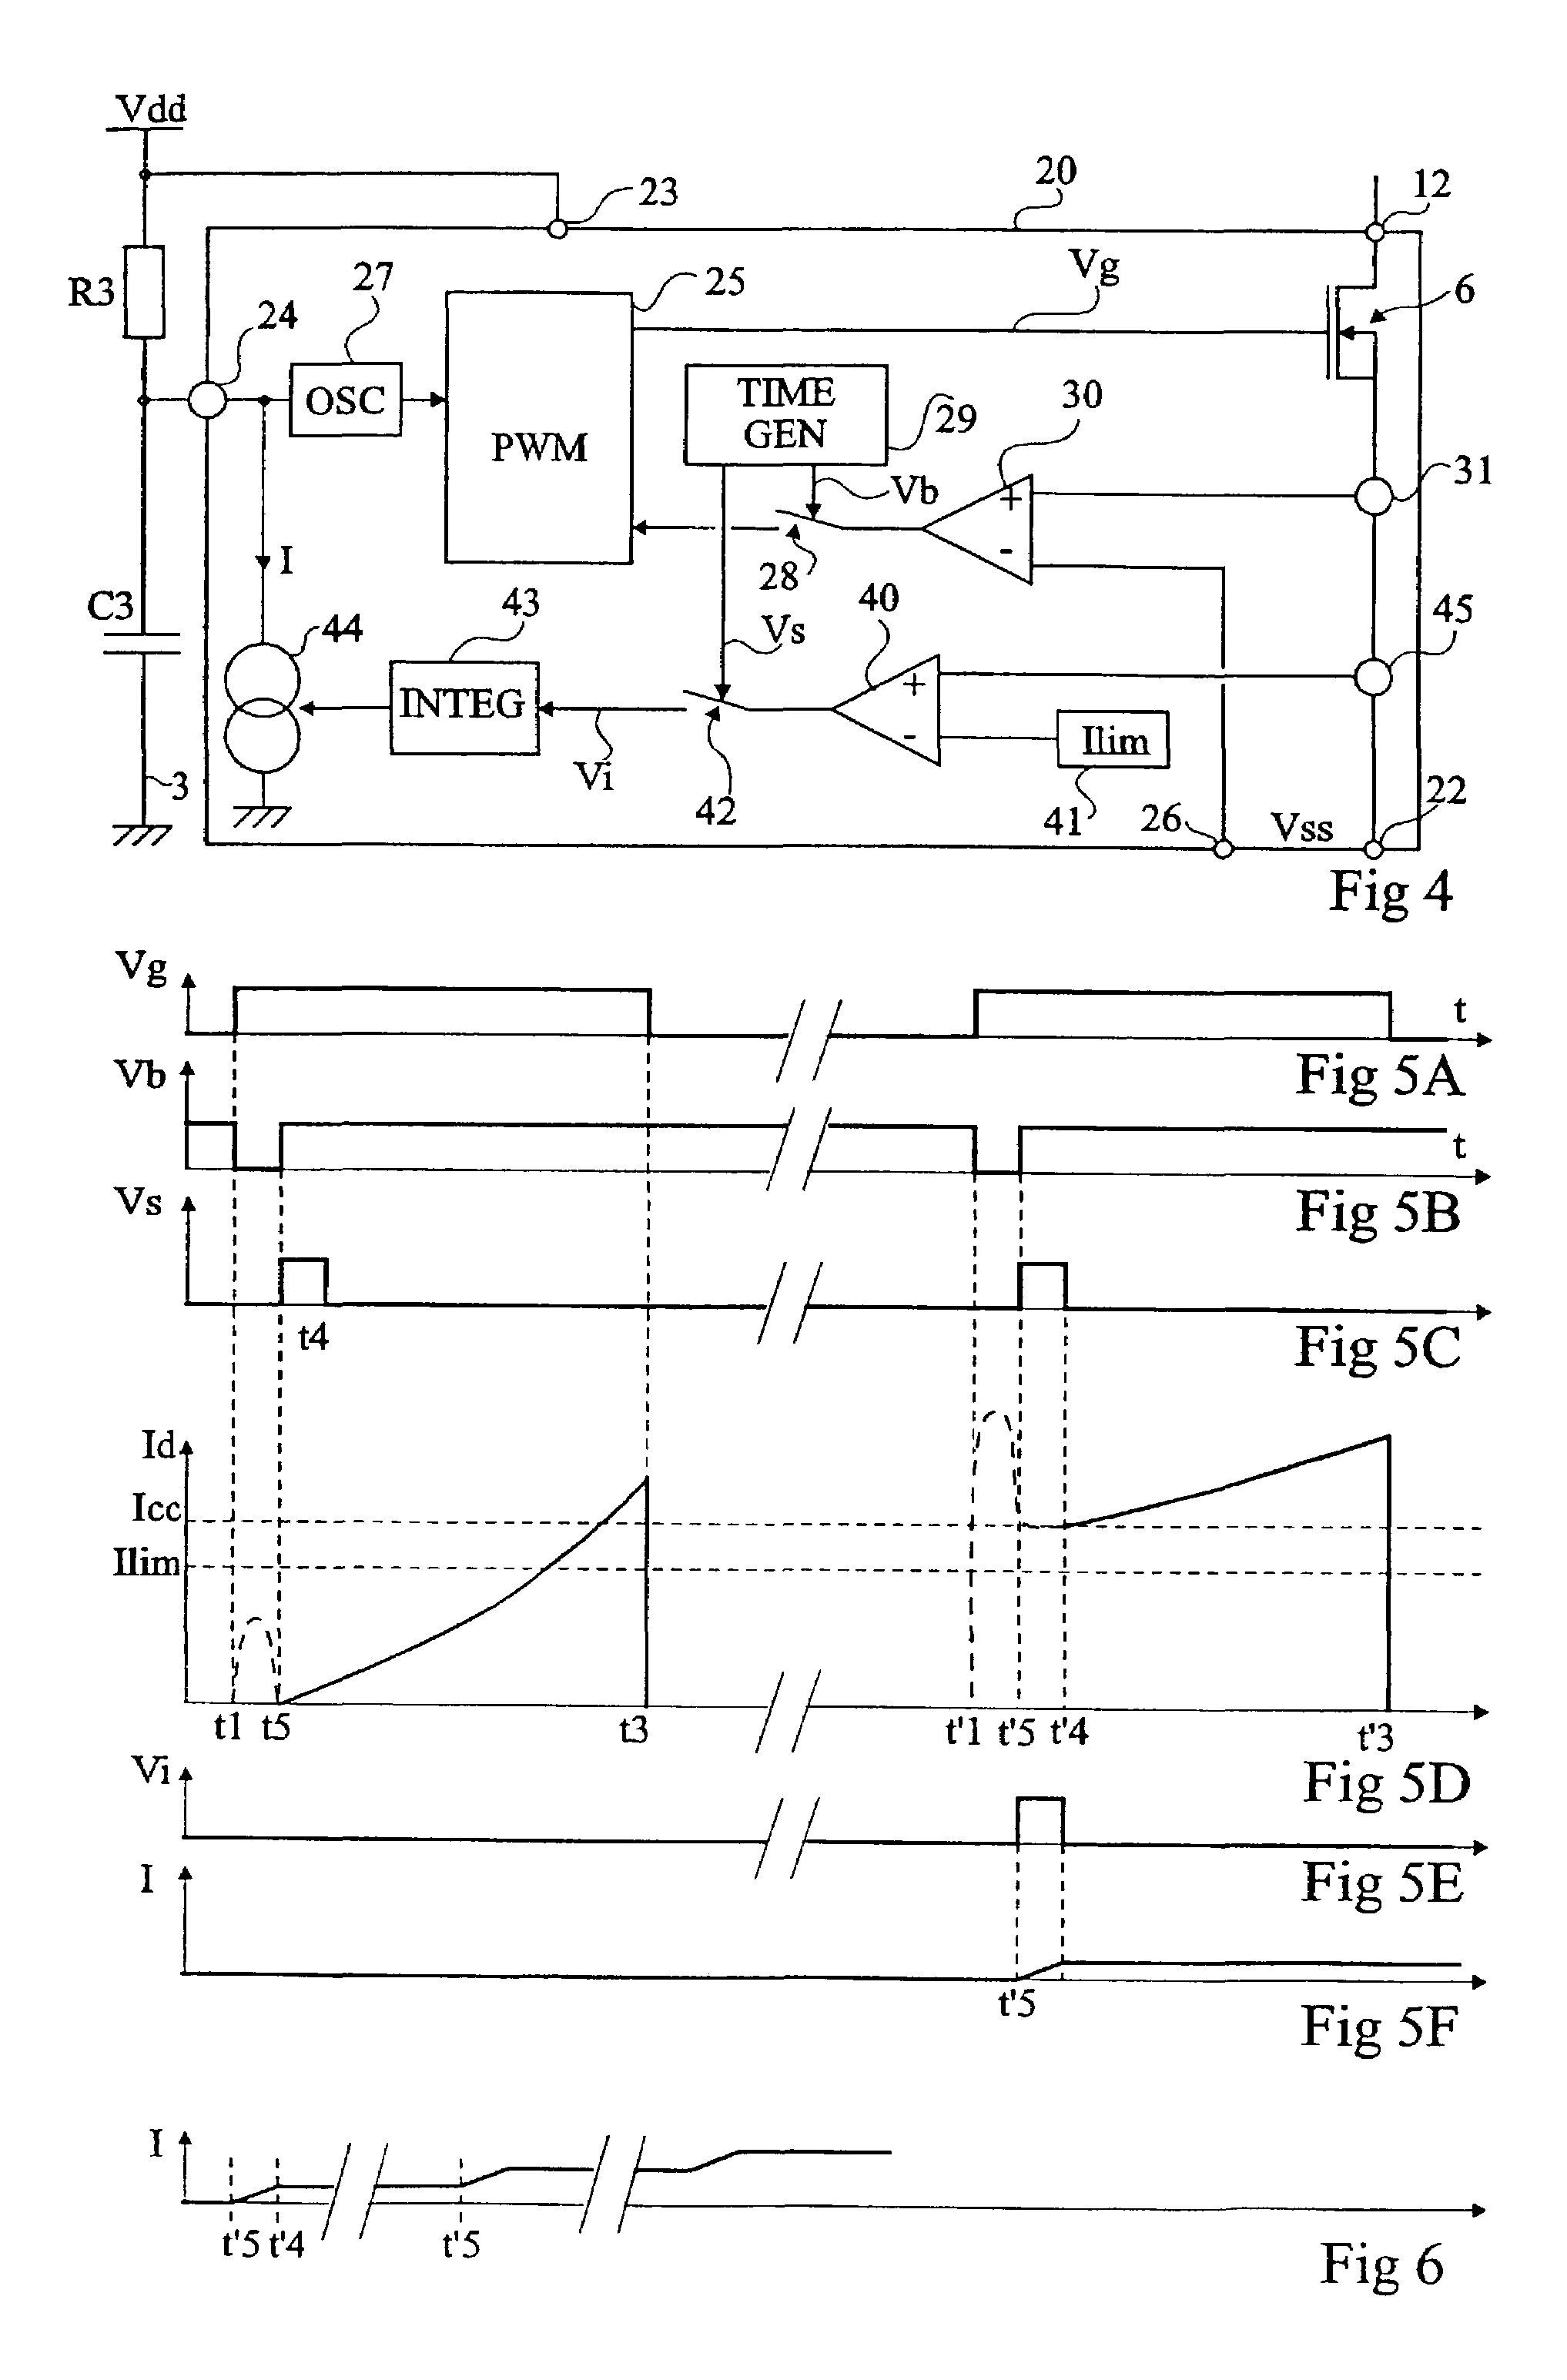 Limiting the continuous mode of a power converter